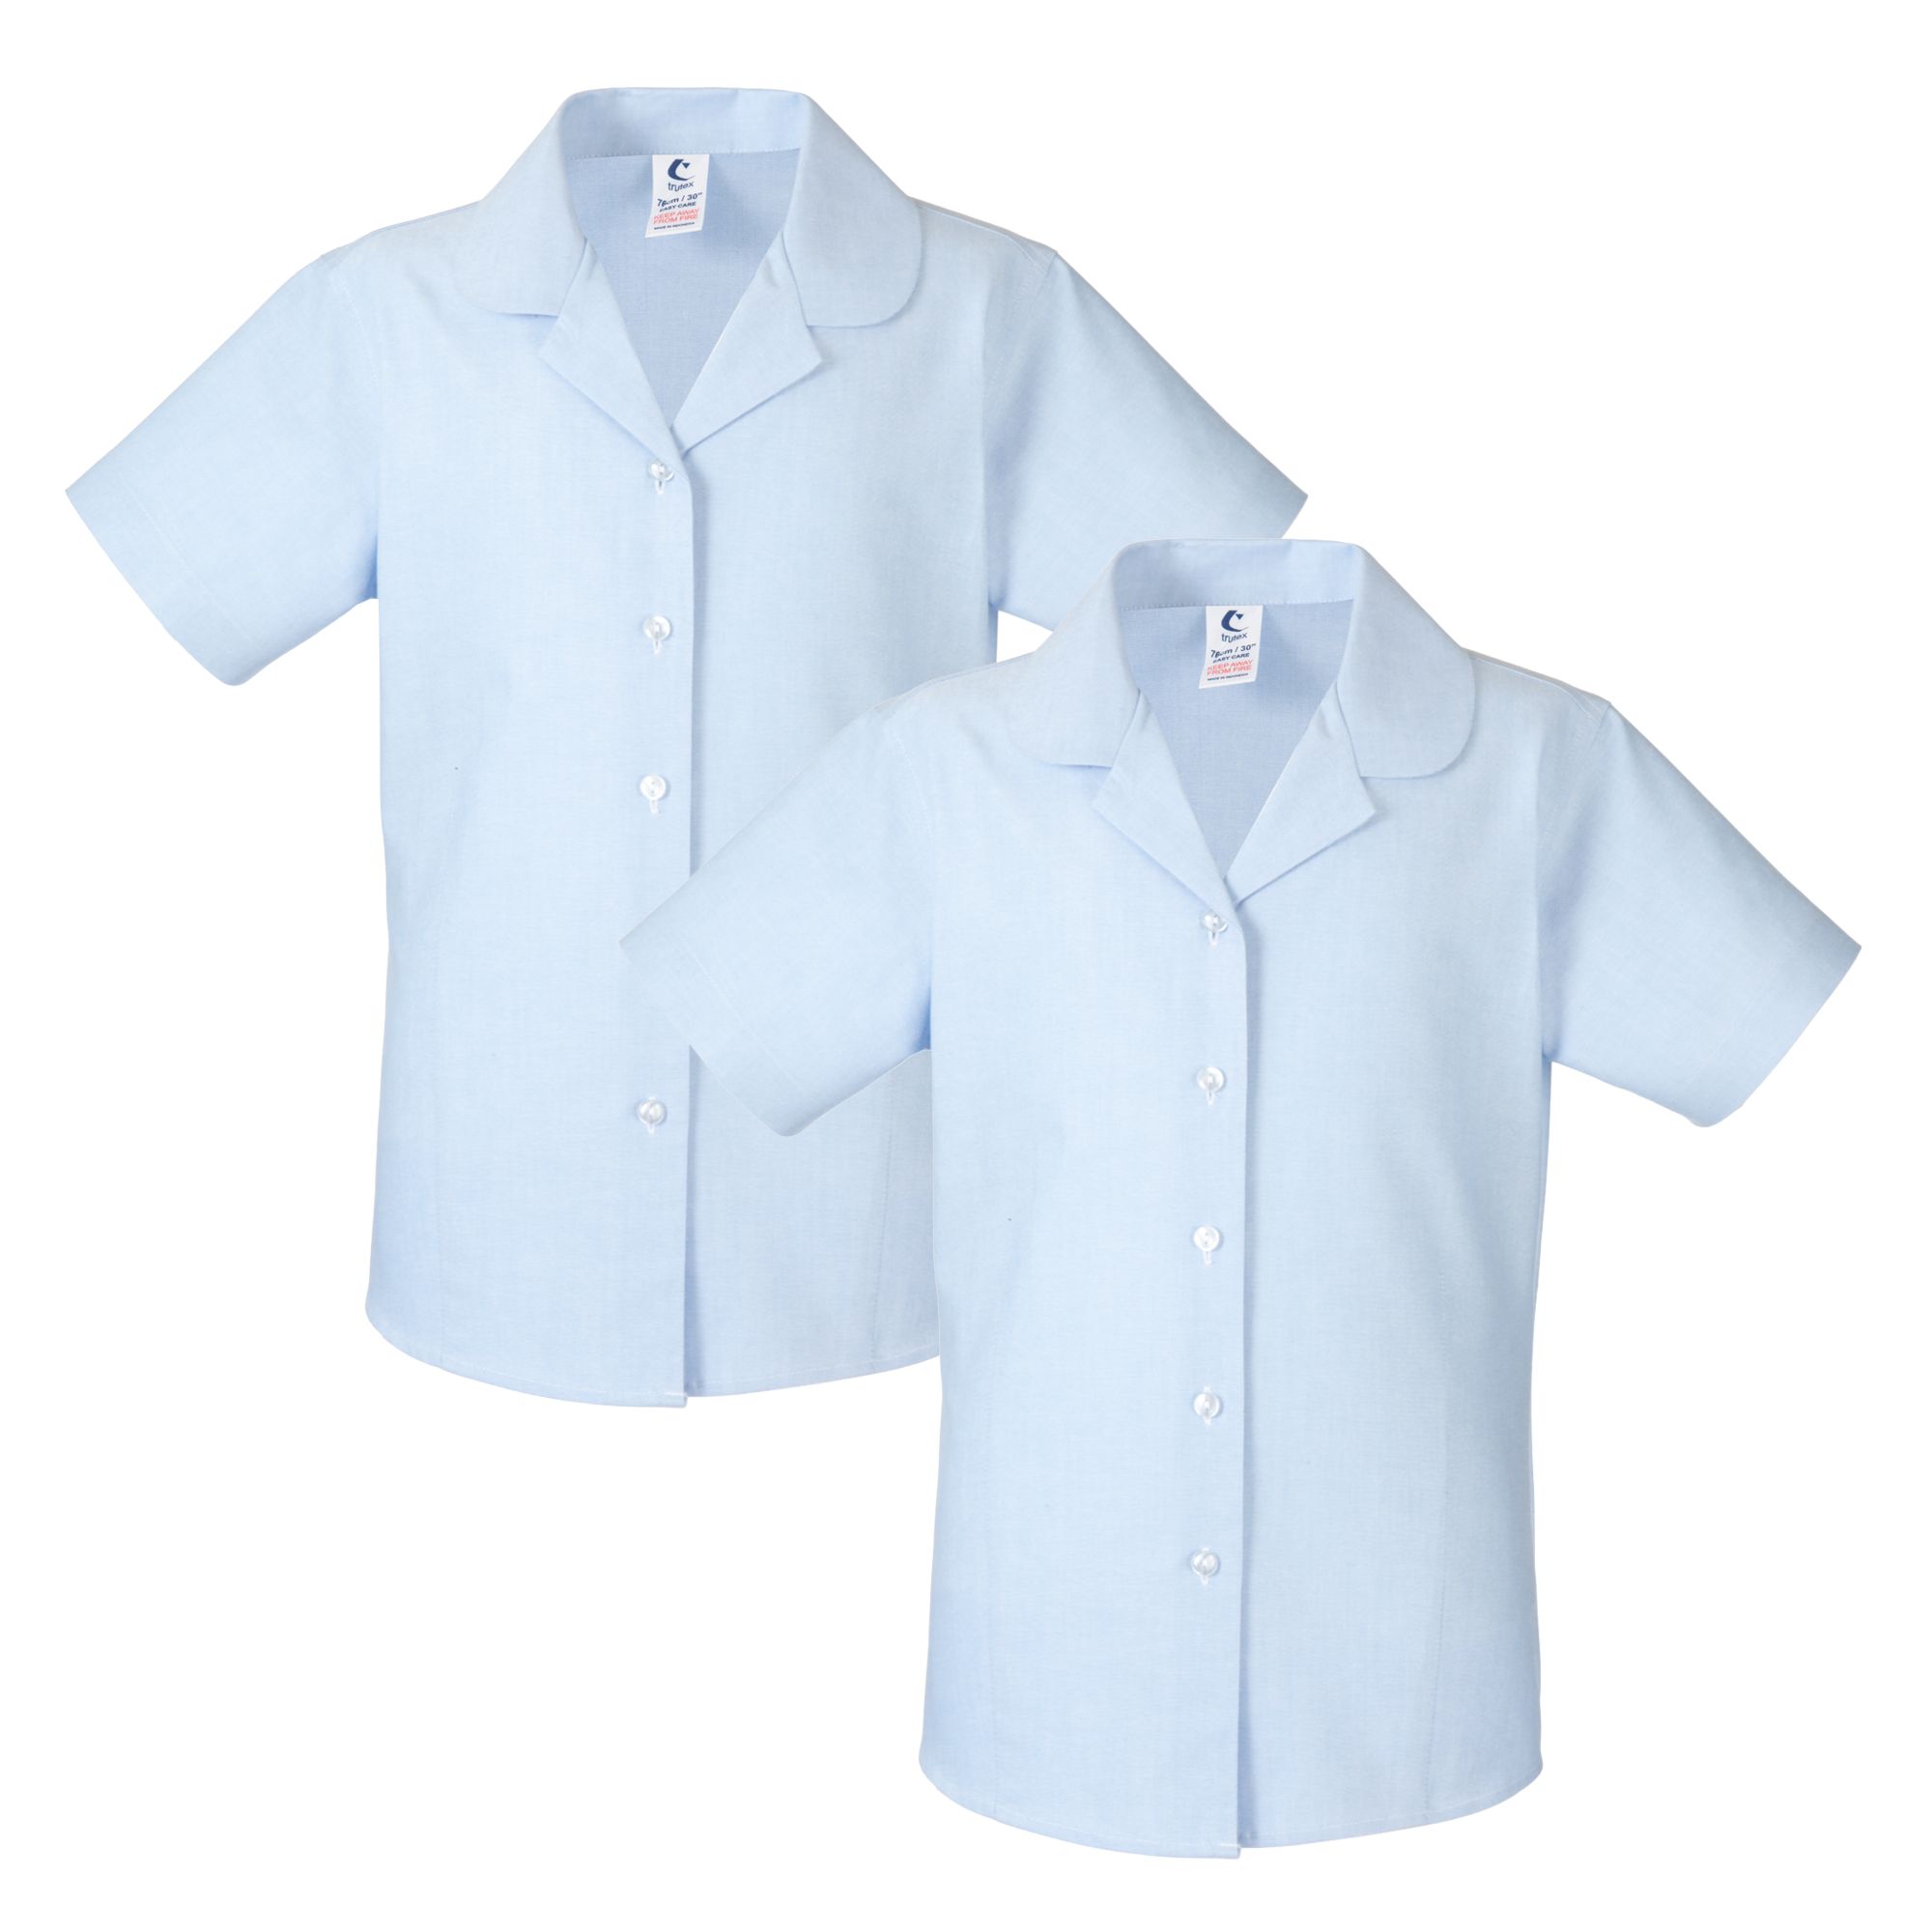 Other Schools School Girls Short Sleeve Blouses, Pack Of